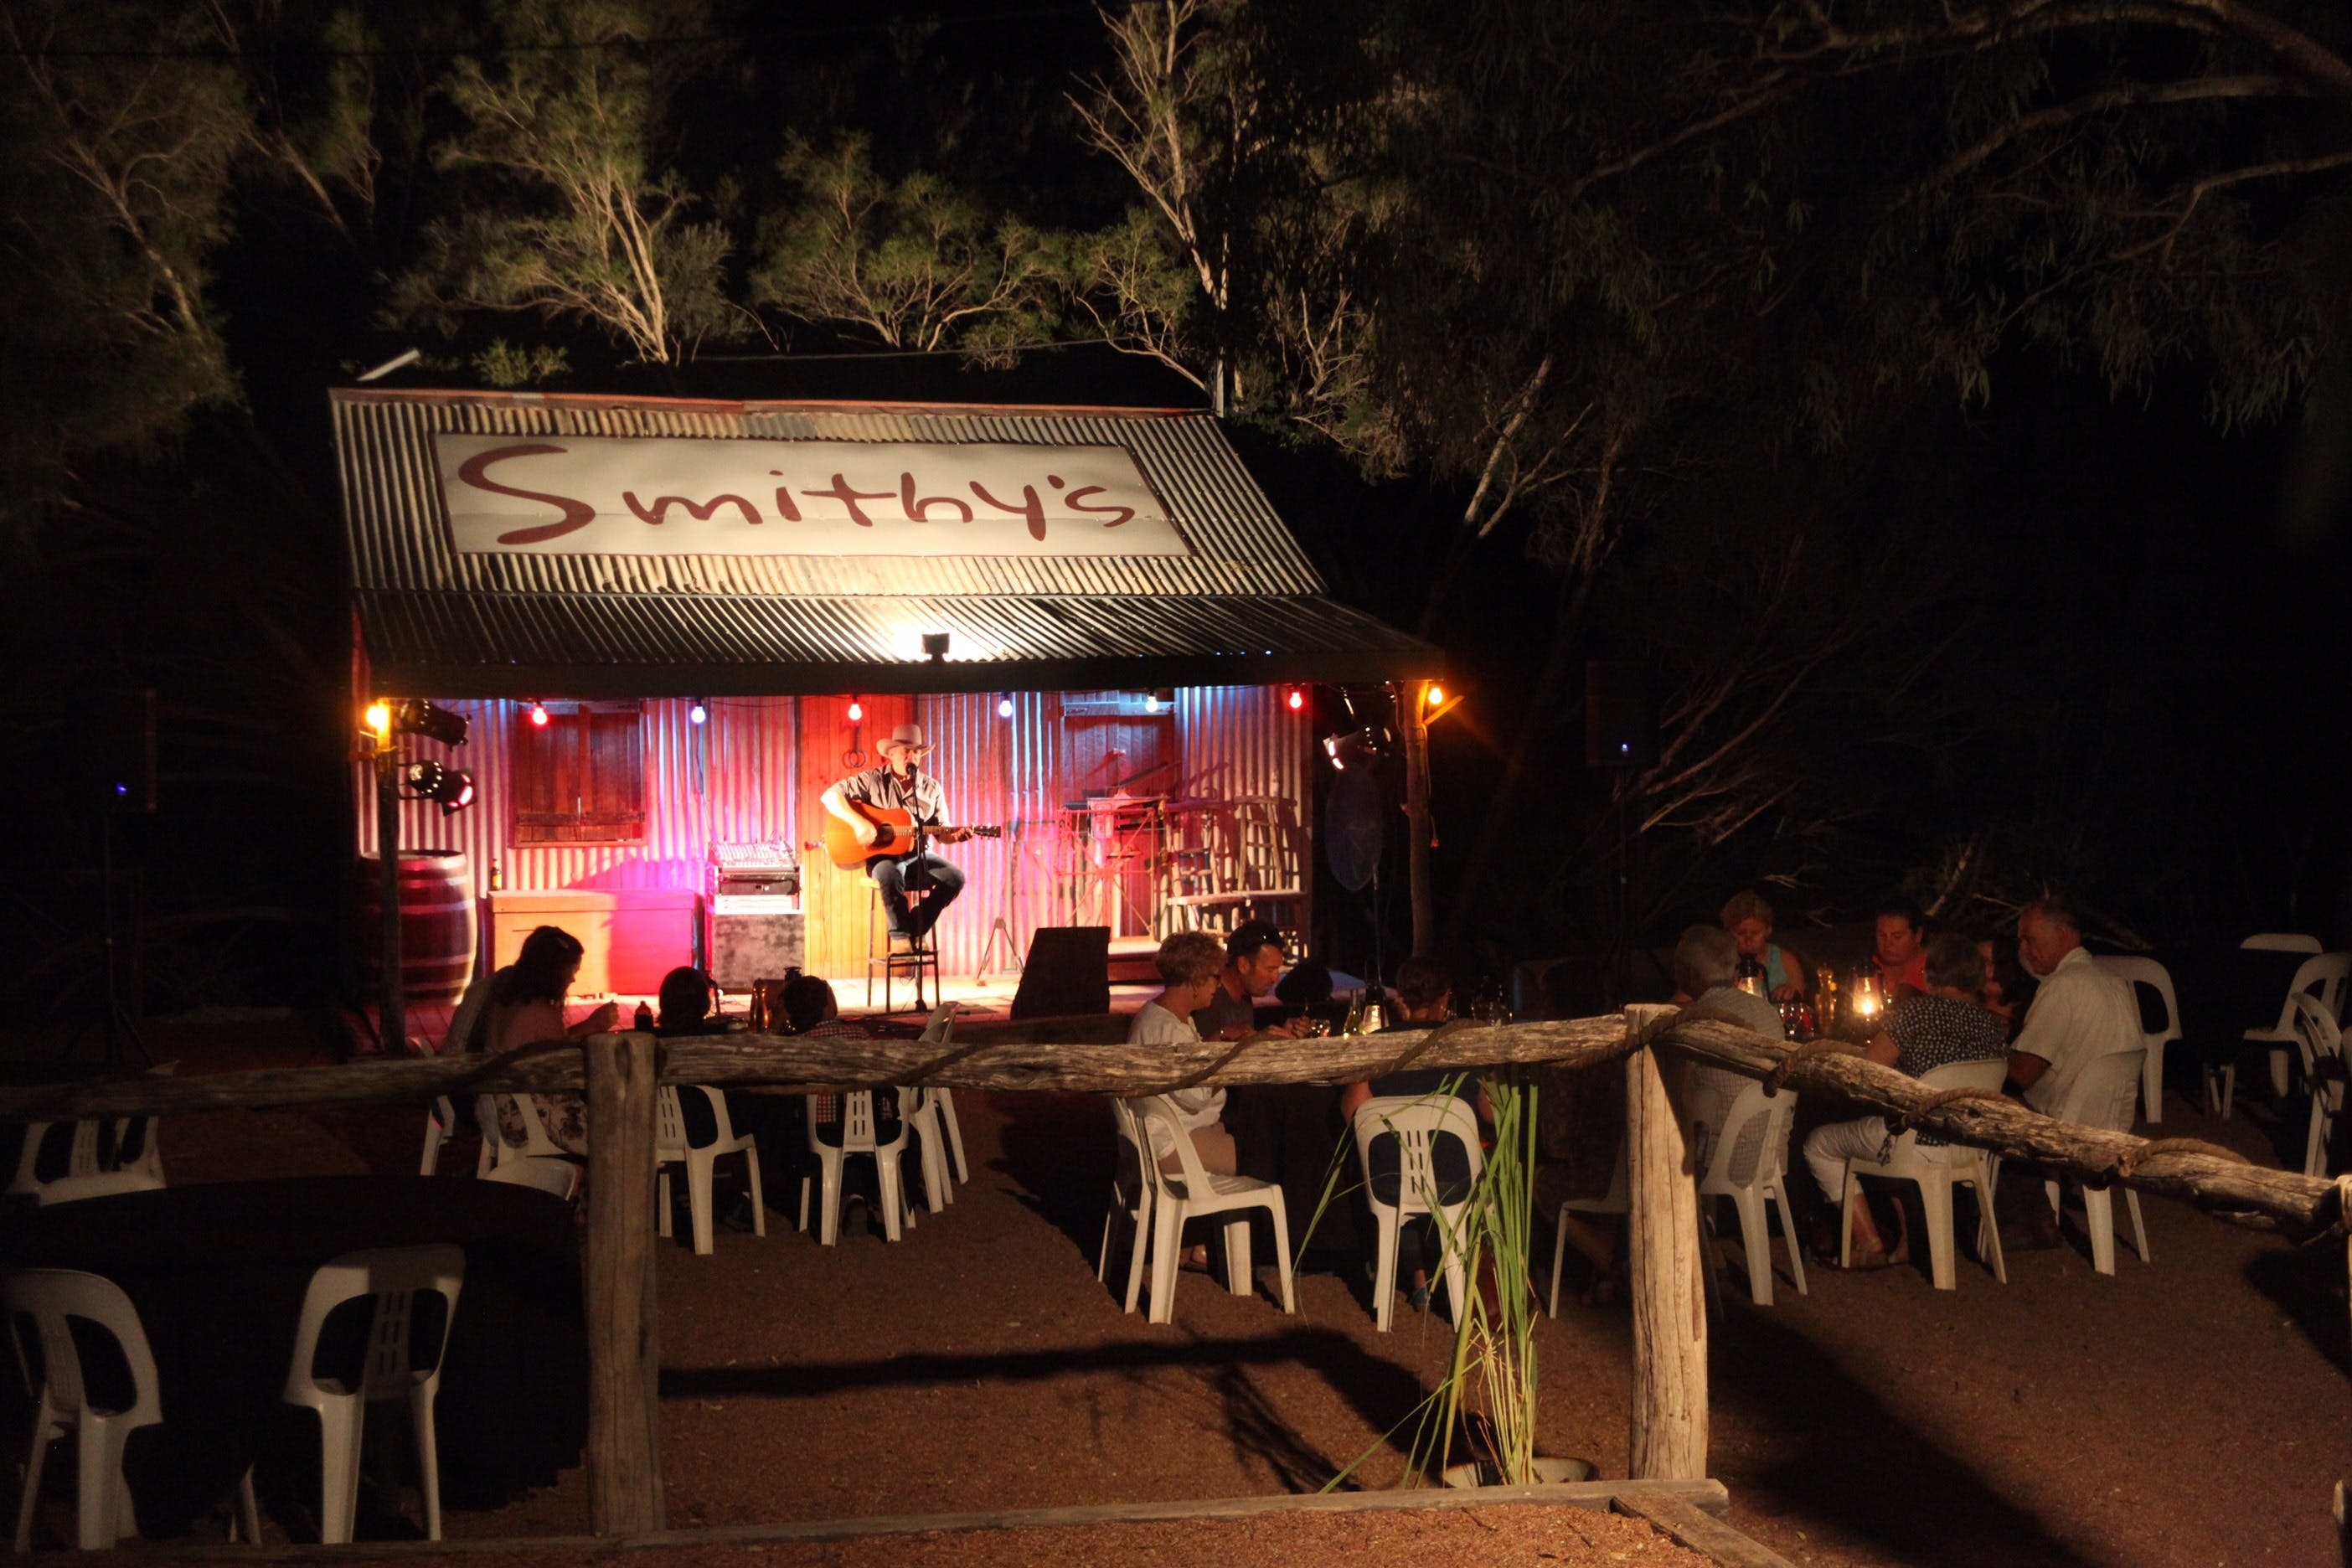 Smithy's Outback Dinner and Show - Carnarvon Accommodation